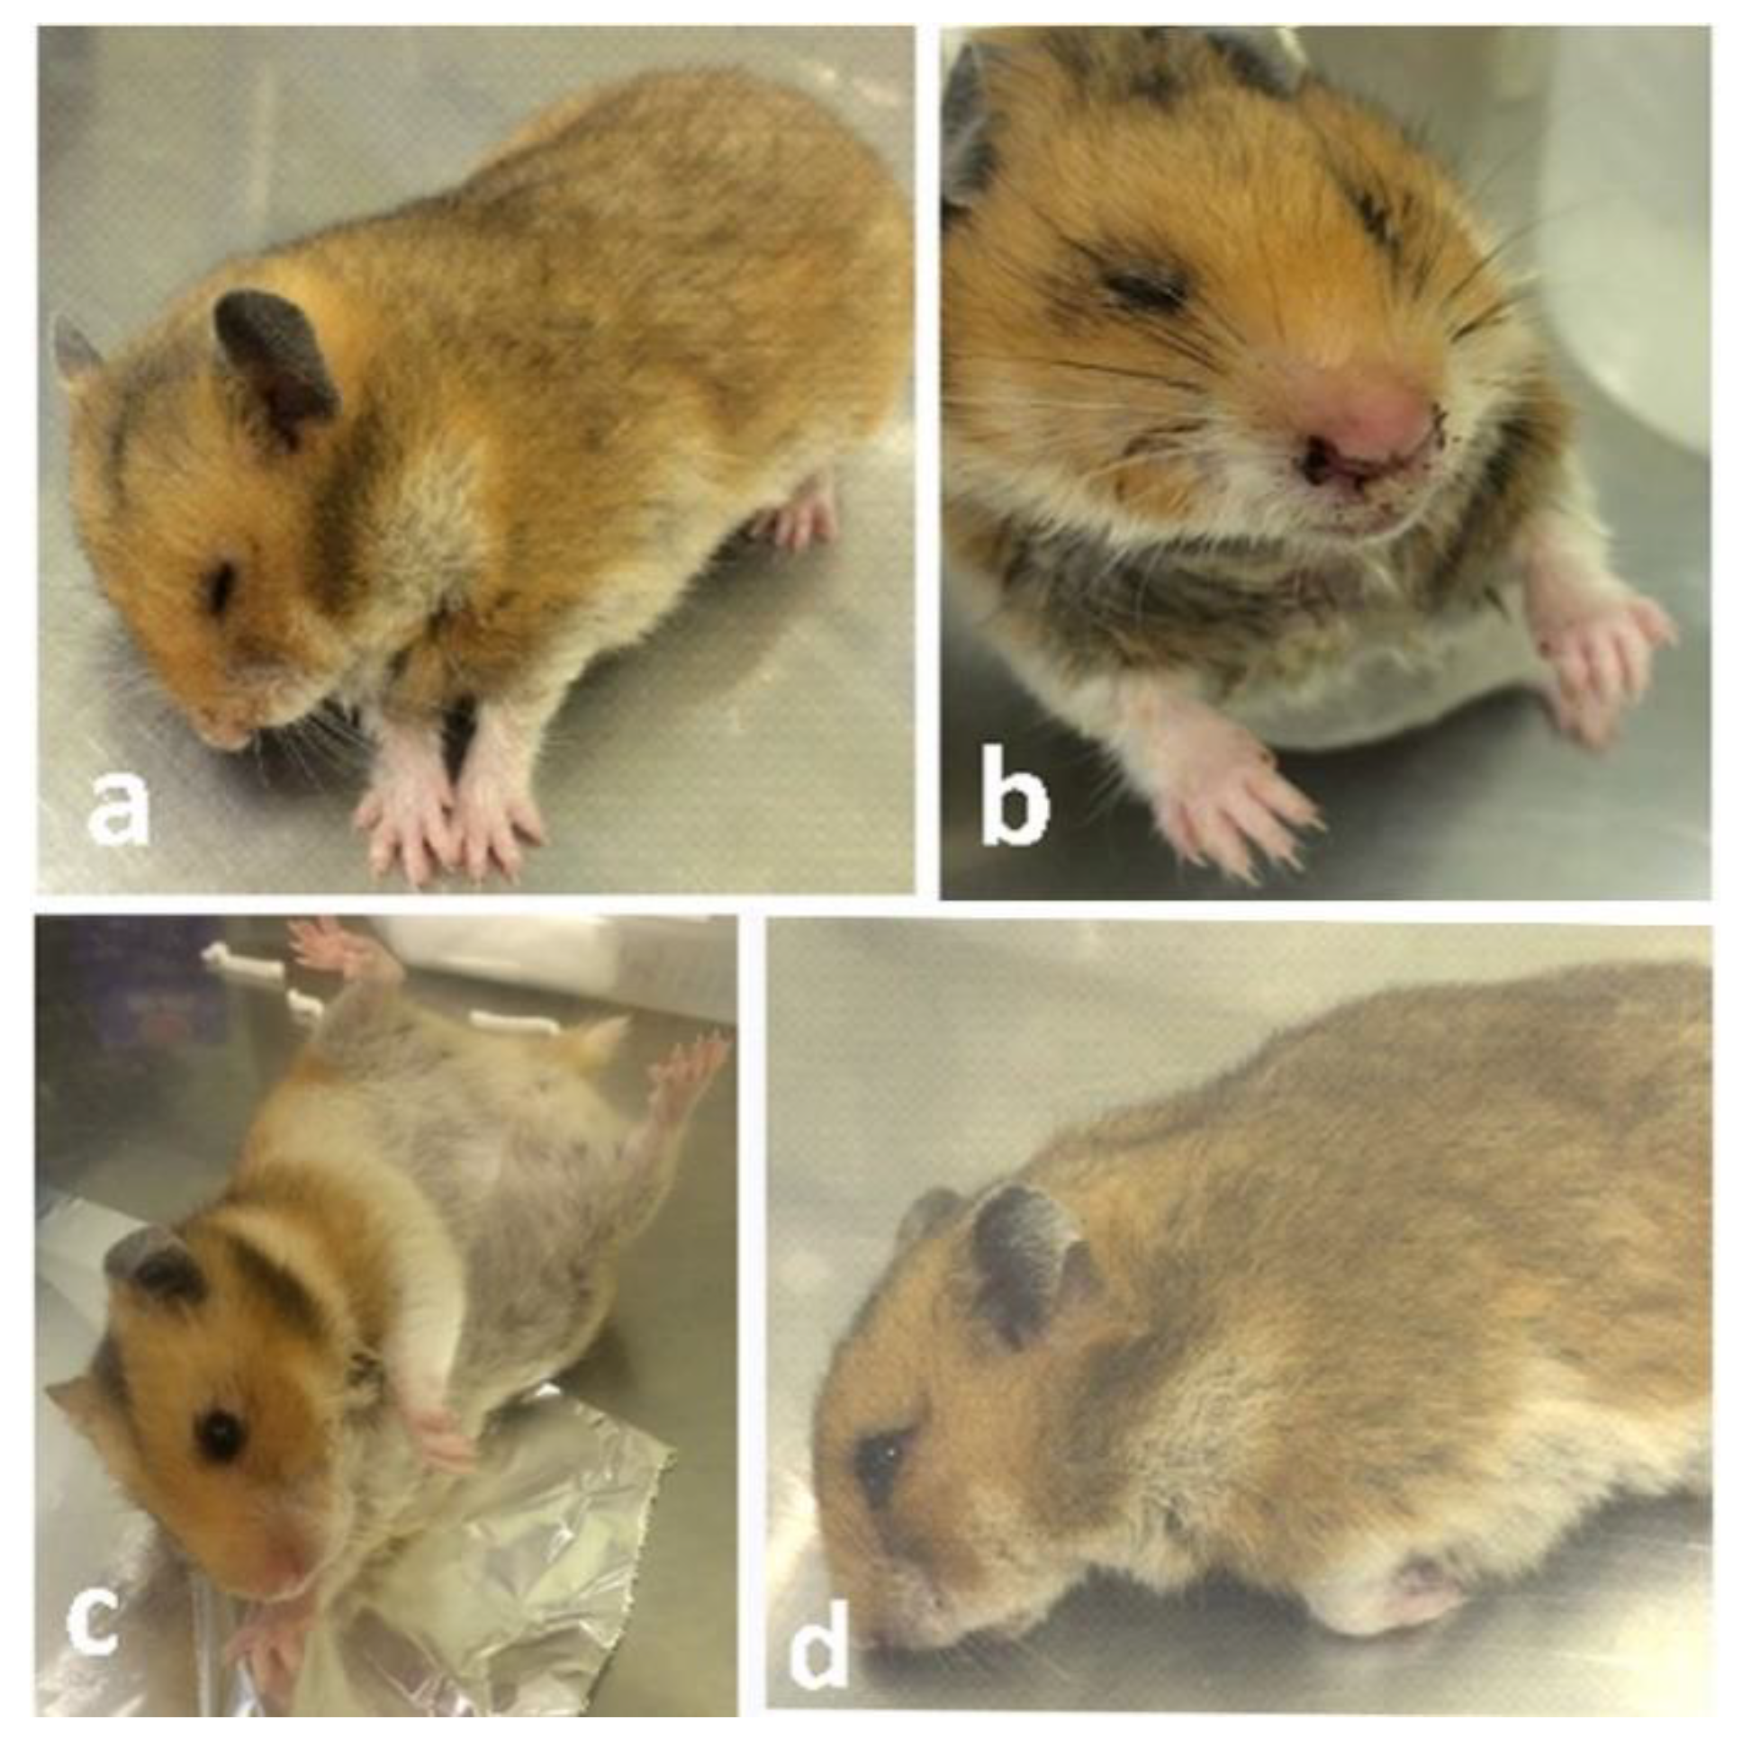 Hamsters in medical research